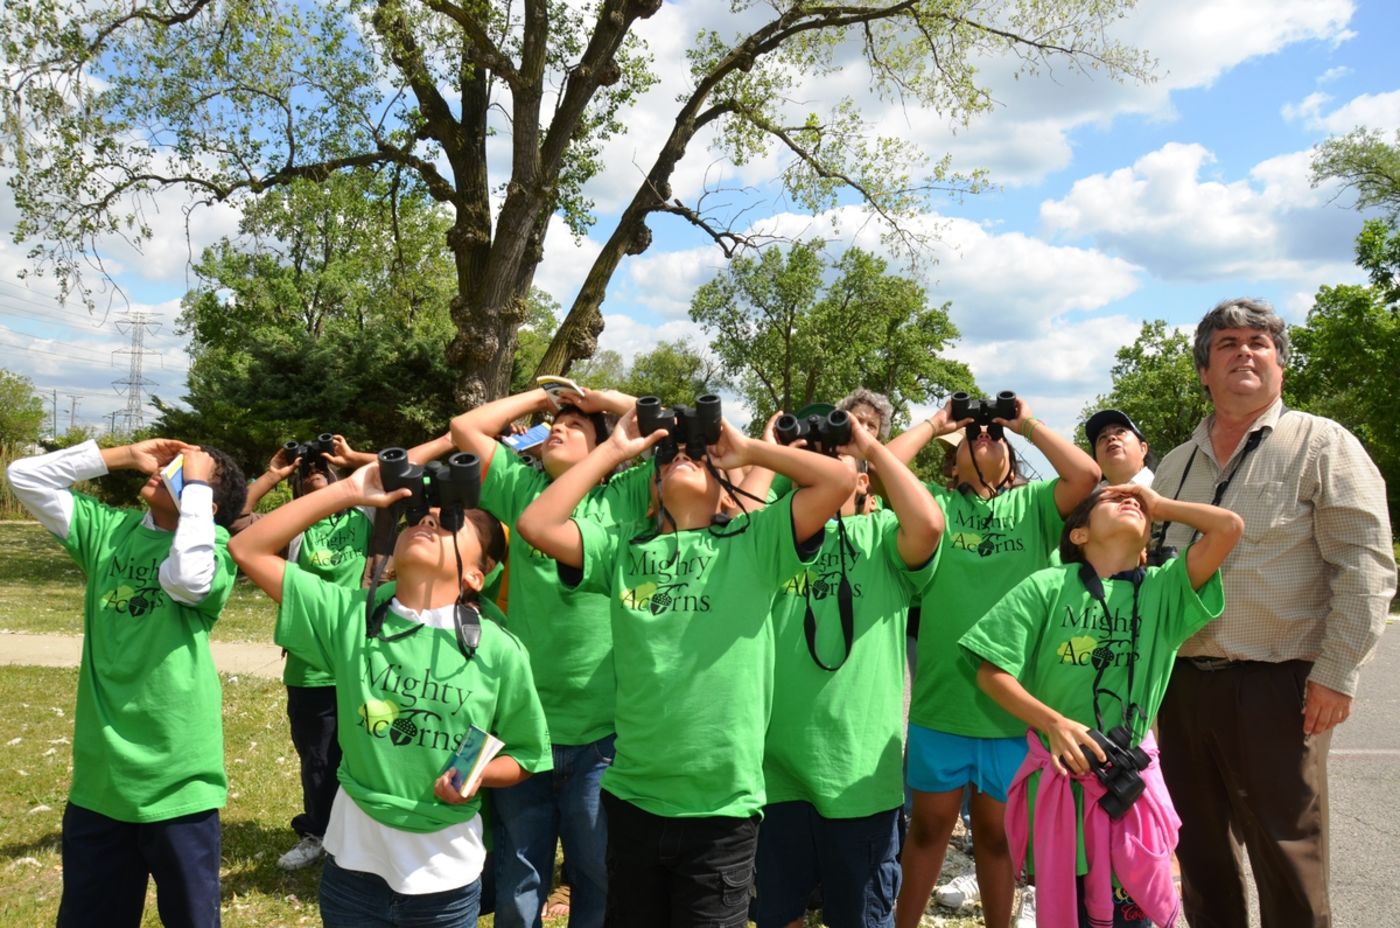 A group of students in matching Mighty Acorns t-shirts use binoculars, looking upwards.